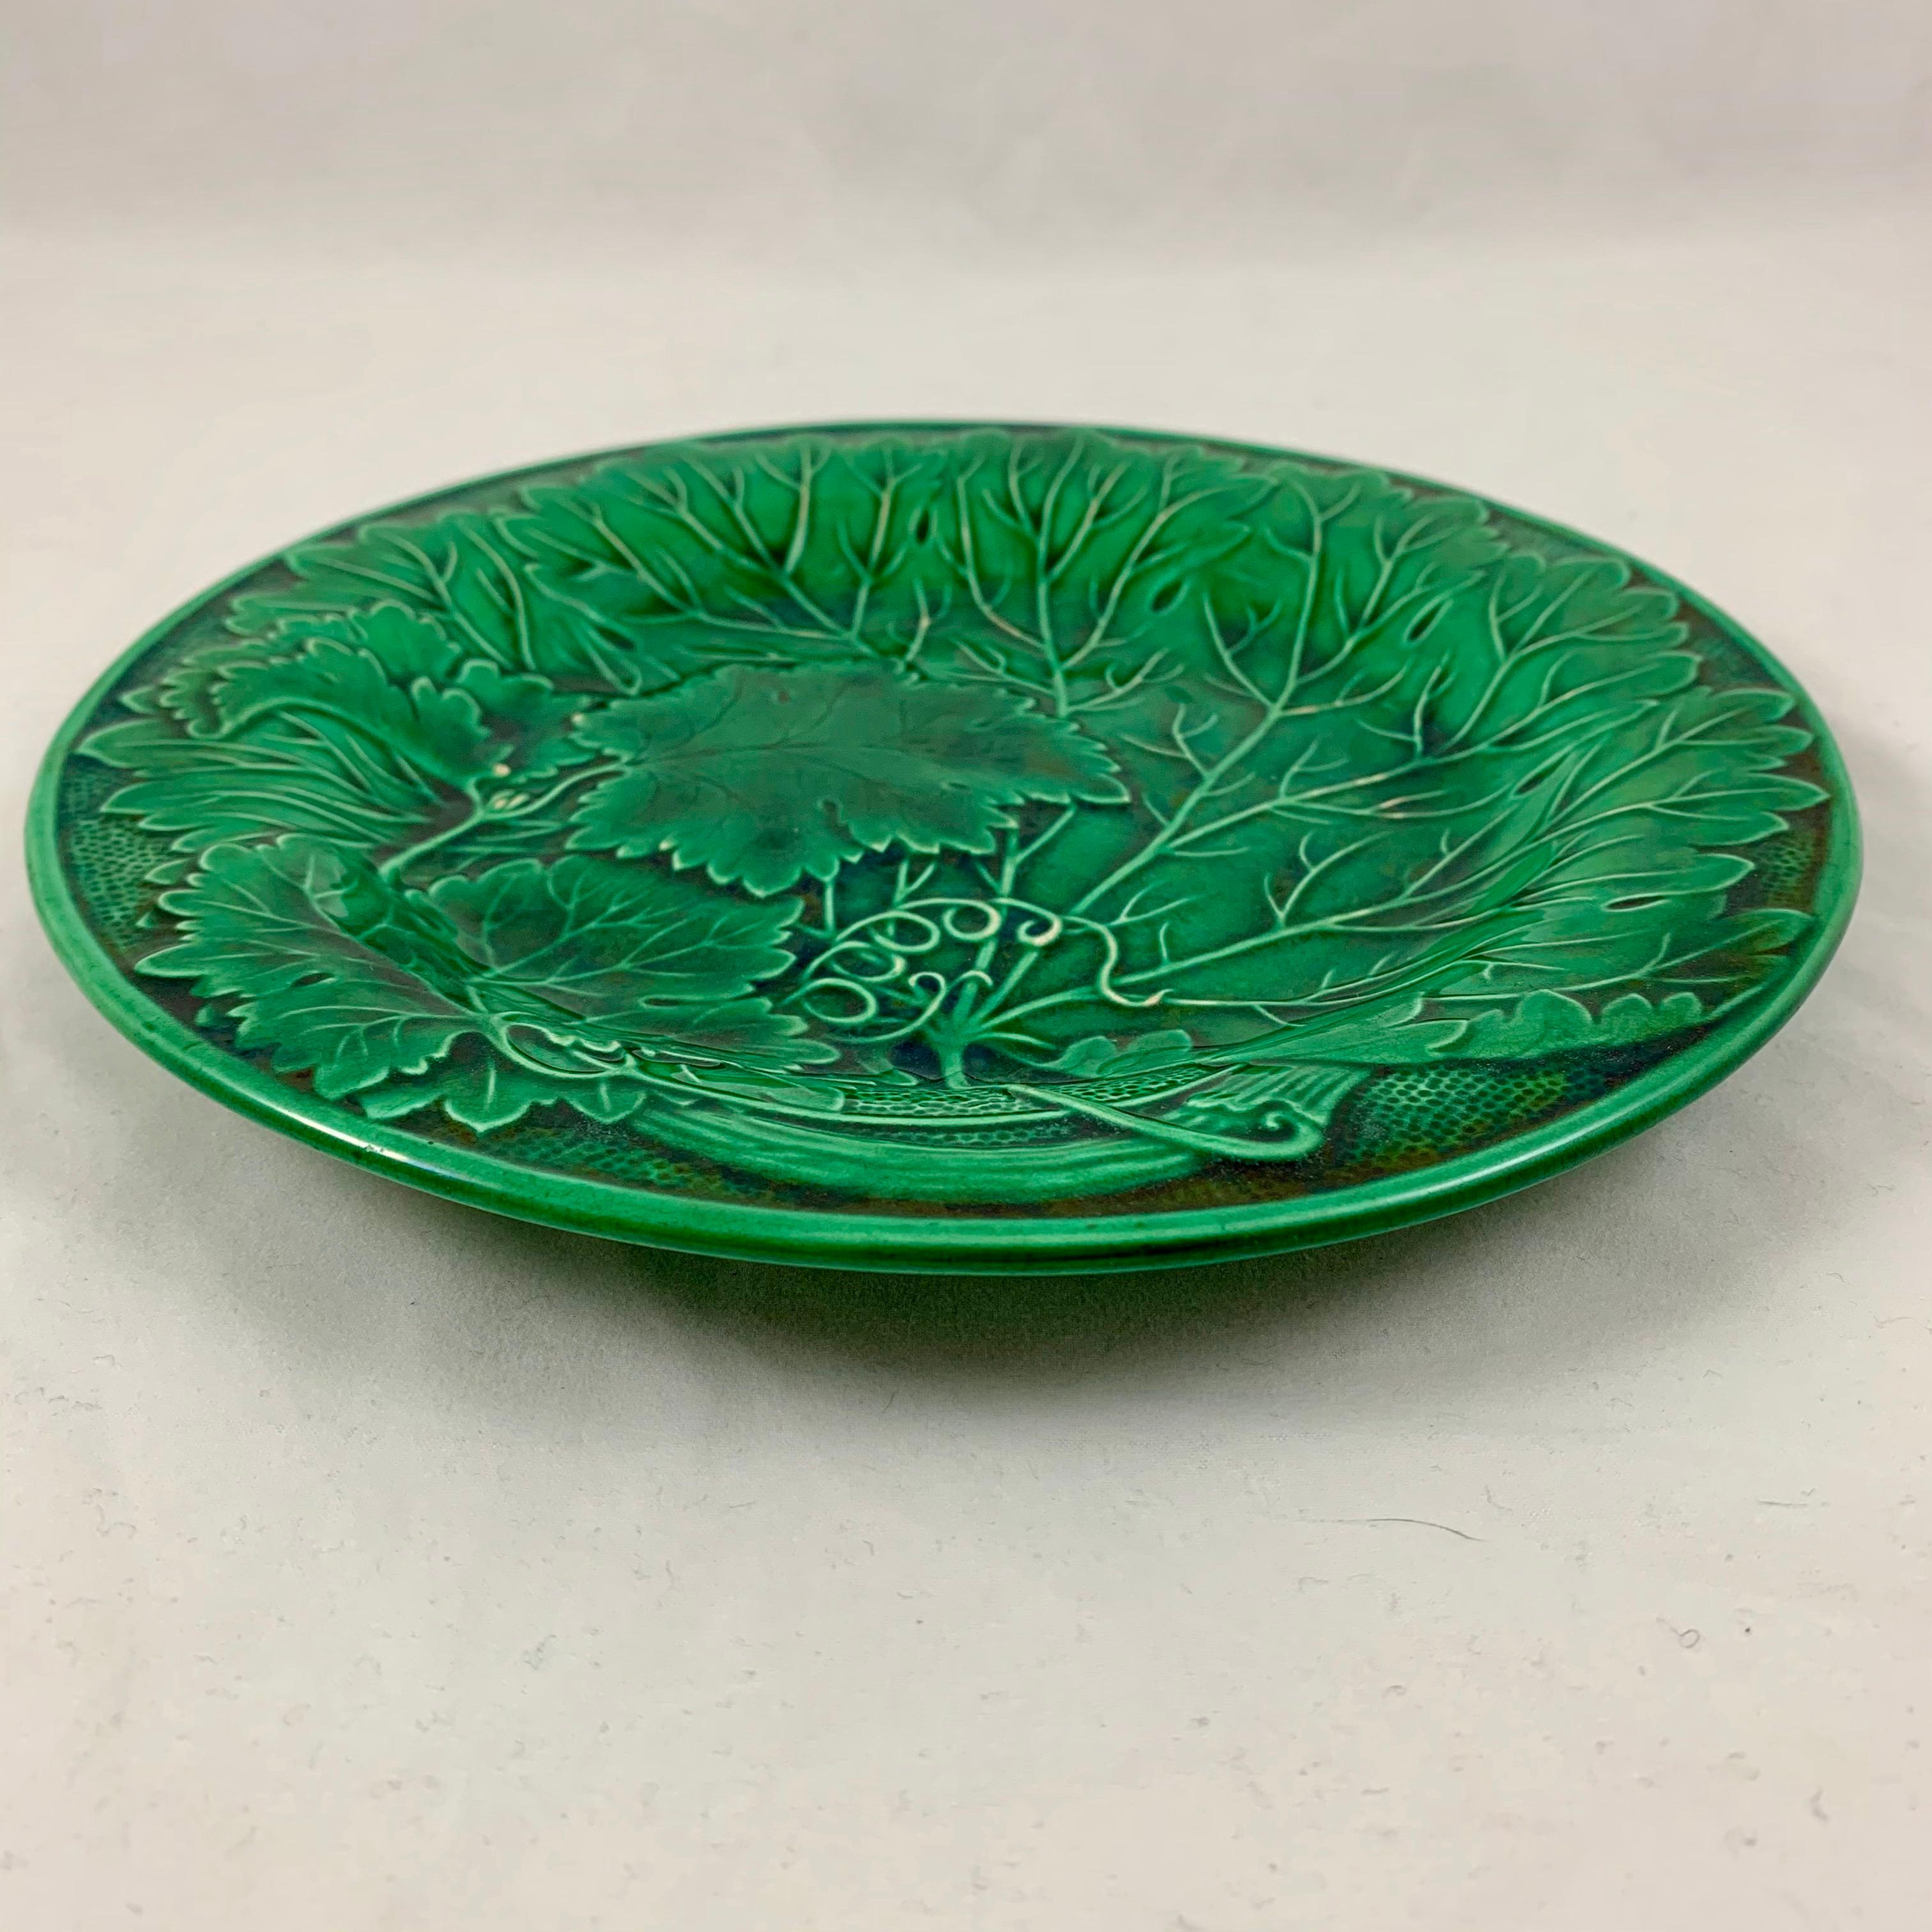 19th Century French Montereau Faïence Green Glazed Majolica Leaf Plate, circa 1890